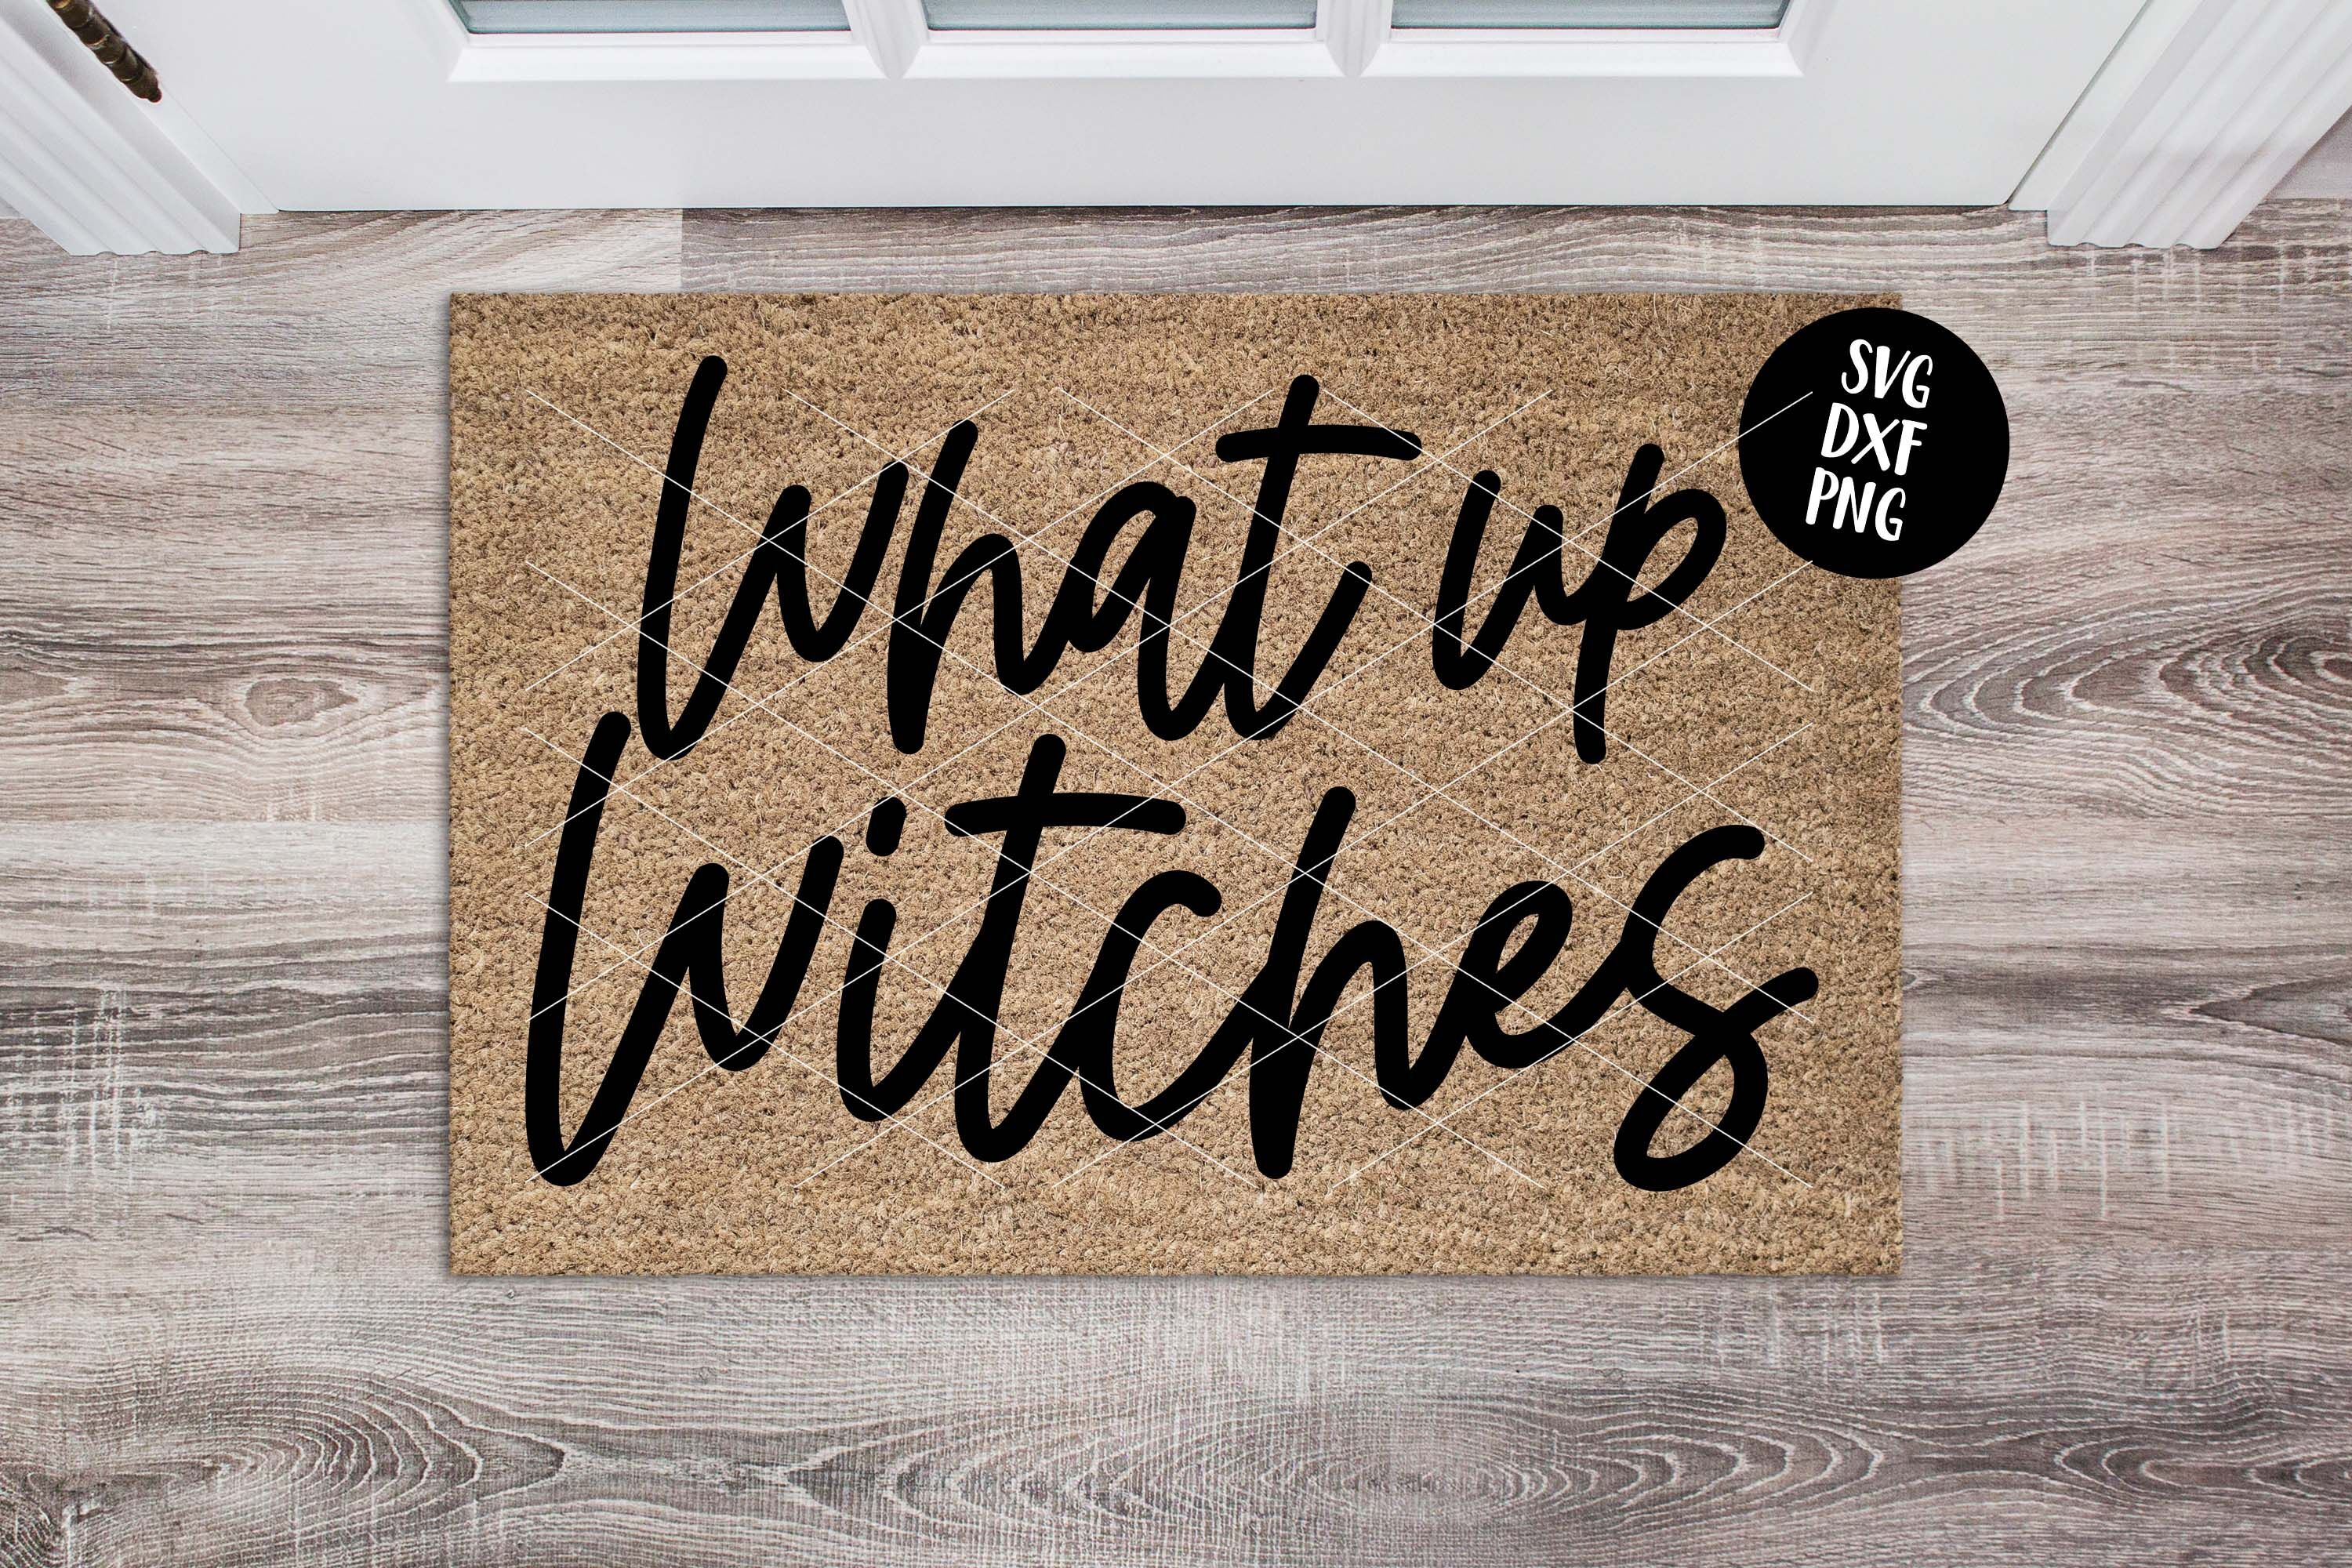 Download What Up Witches Halloween Doormat Svg Dxf Png By Svgfox Thehungryjpeg Com